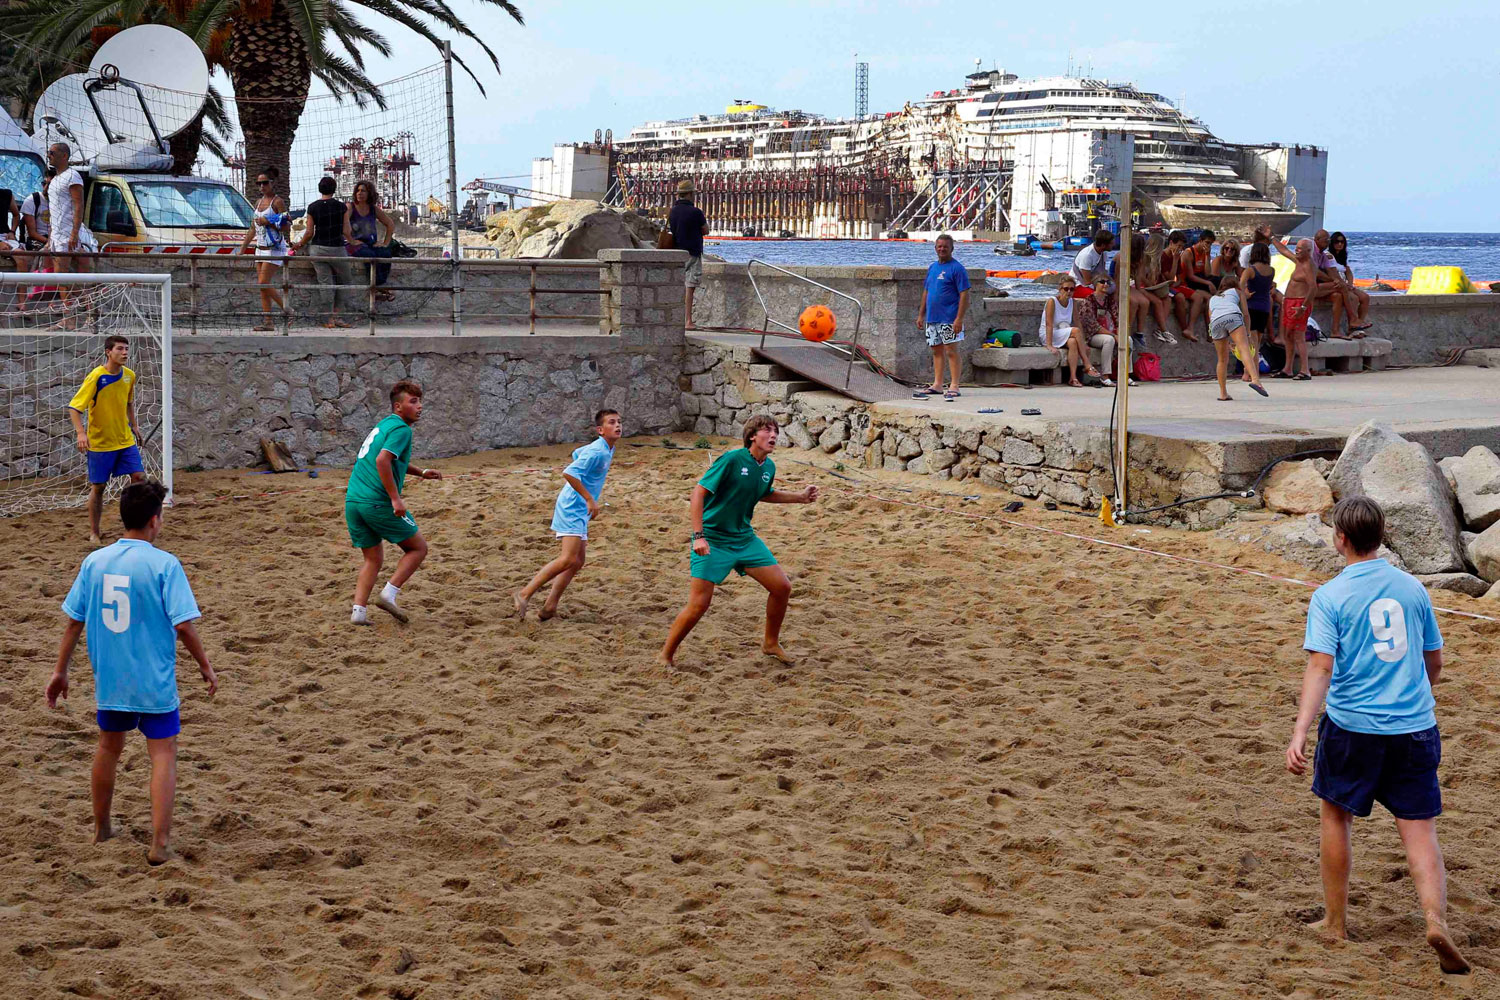 Youths play football at a beach as the Costa Concordia cruise liner is seen during its refloating operation at Giglio harbour